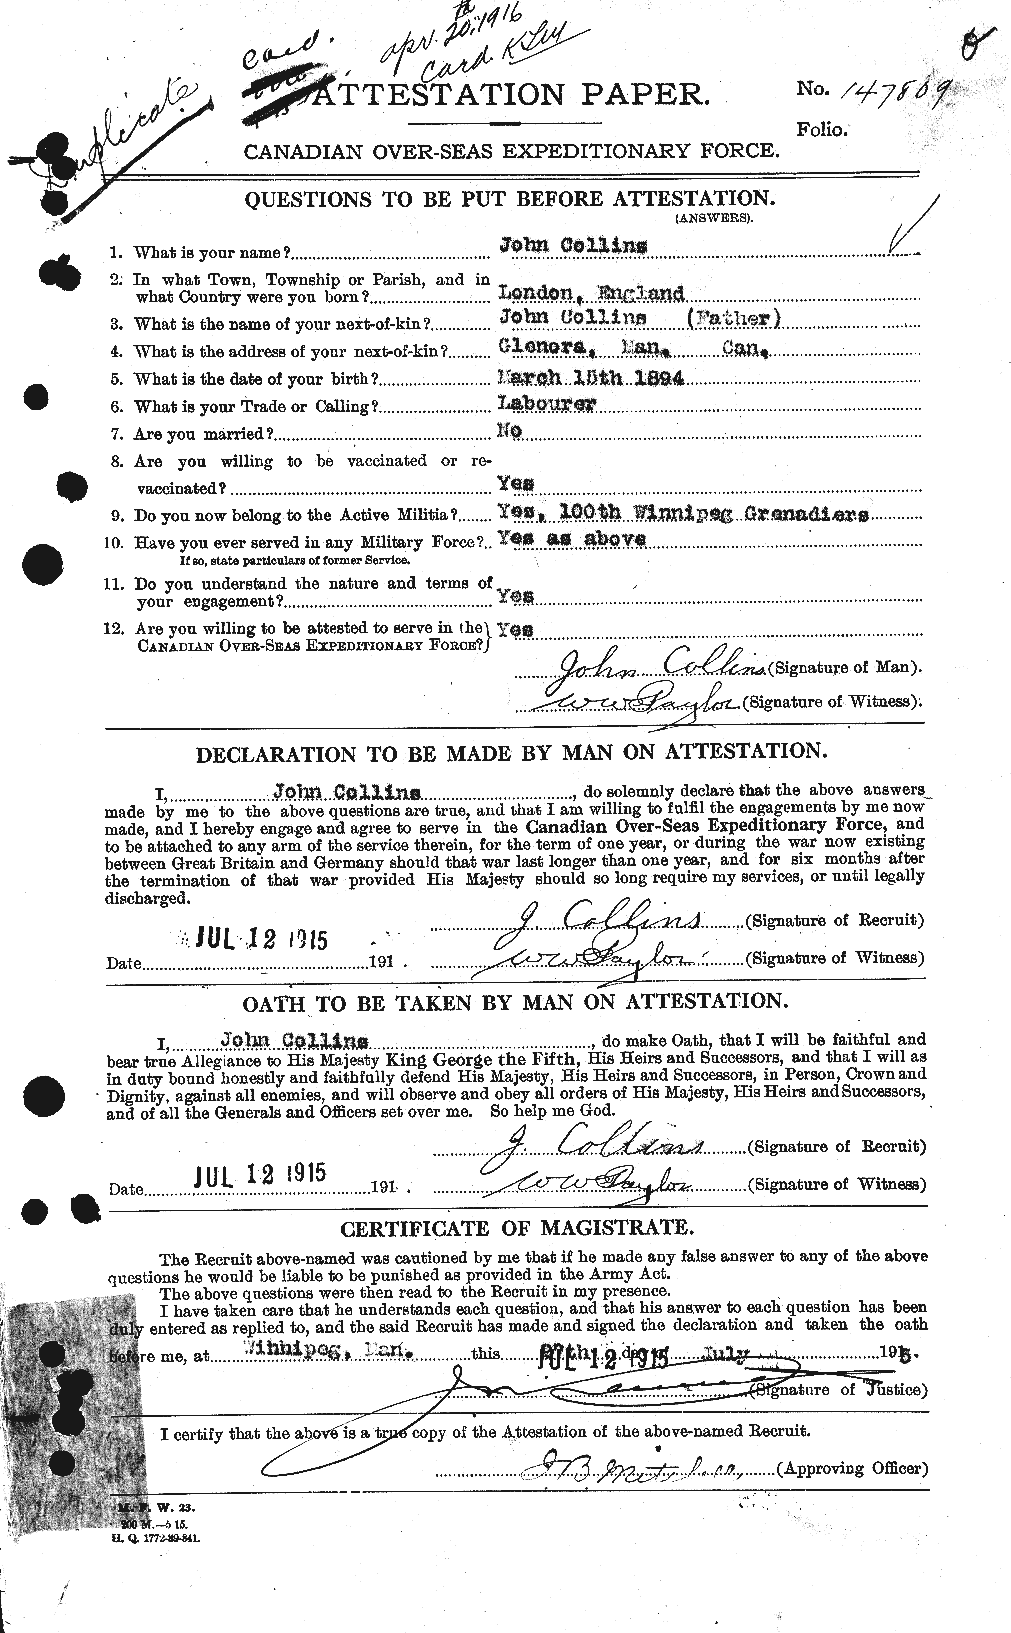 Personnel Records of the First World War - CEF 069794a